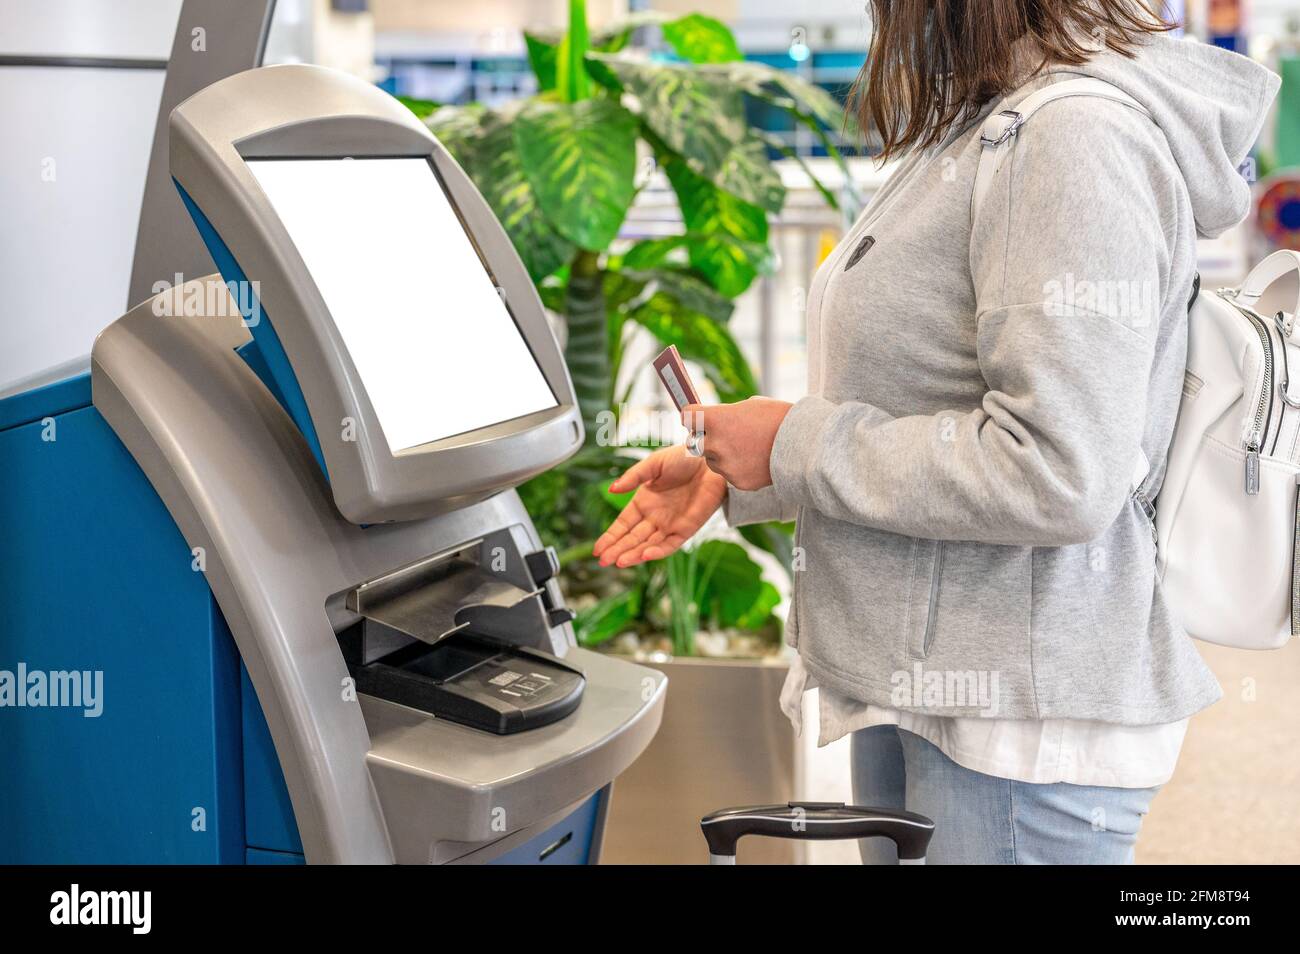 CAIRO, EGYPT - May 06, 2021: EGYPTAIR airline counter for self-check-in at Cairo airport. Woman using Self service machine and help desk kiosk at airp Stock Photo